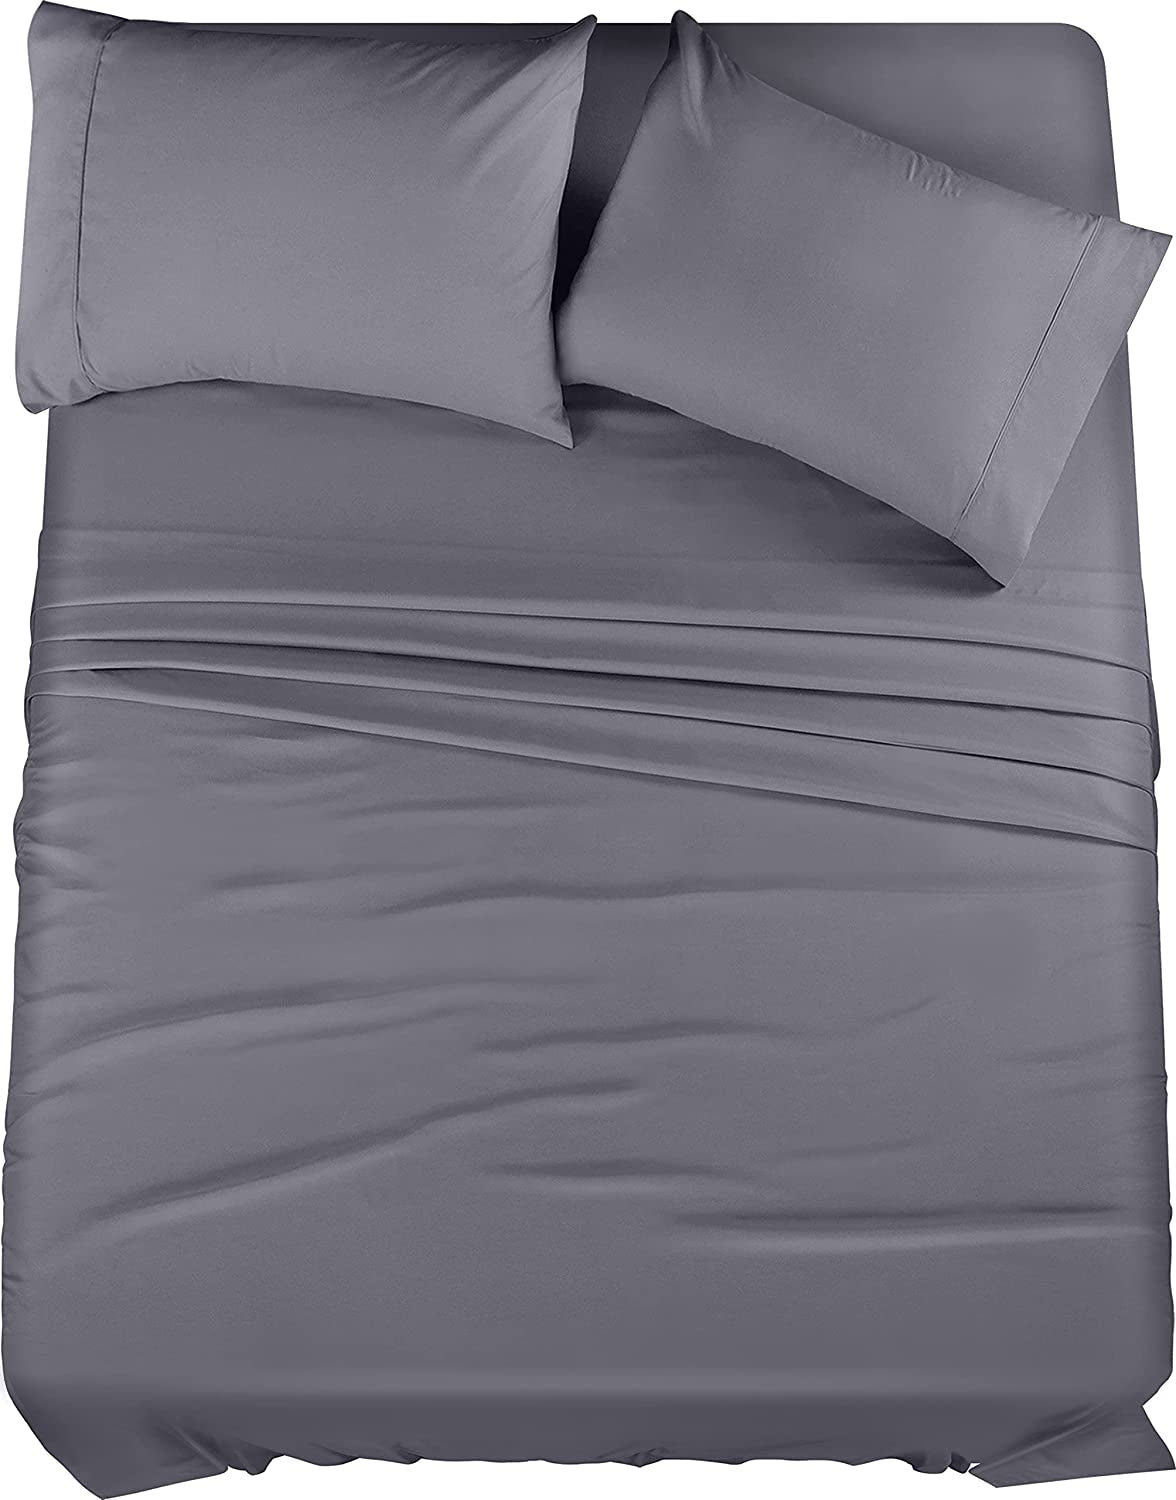 Queen Bed Sheets Set - 4 Piece Bedding - Brushed Microfiber - Shrinkage and Fade Resistant - Easy Care (Queen, Grey)